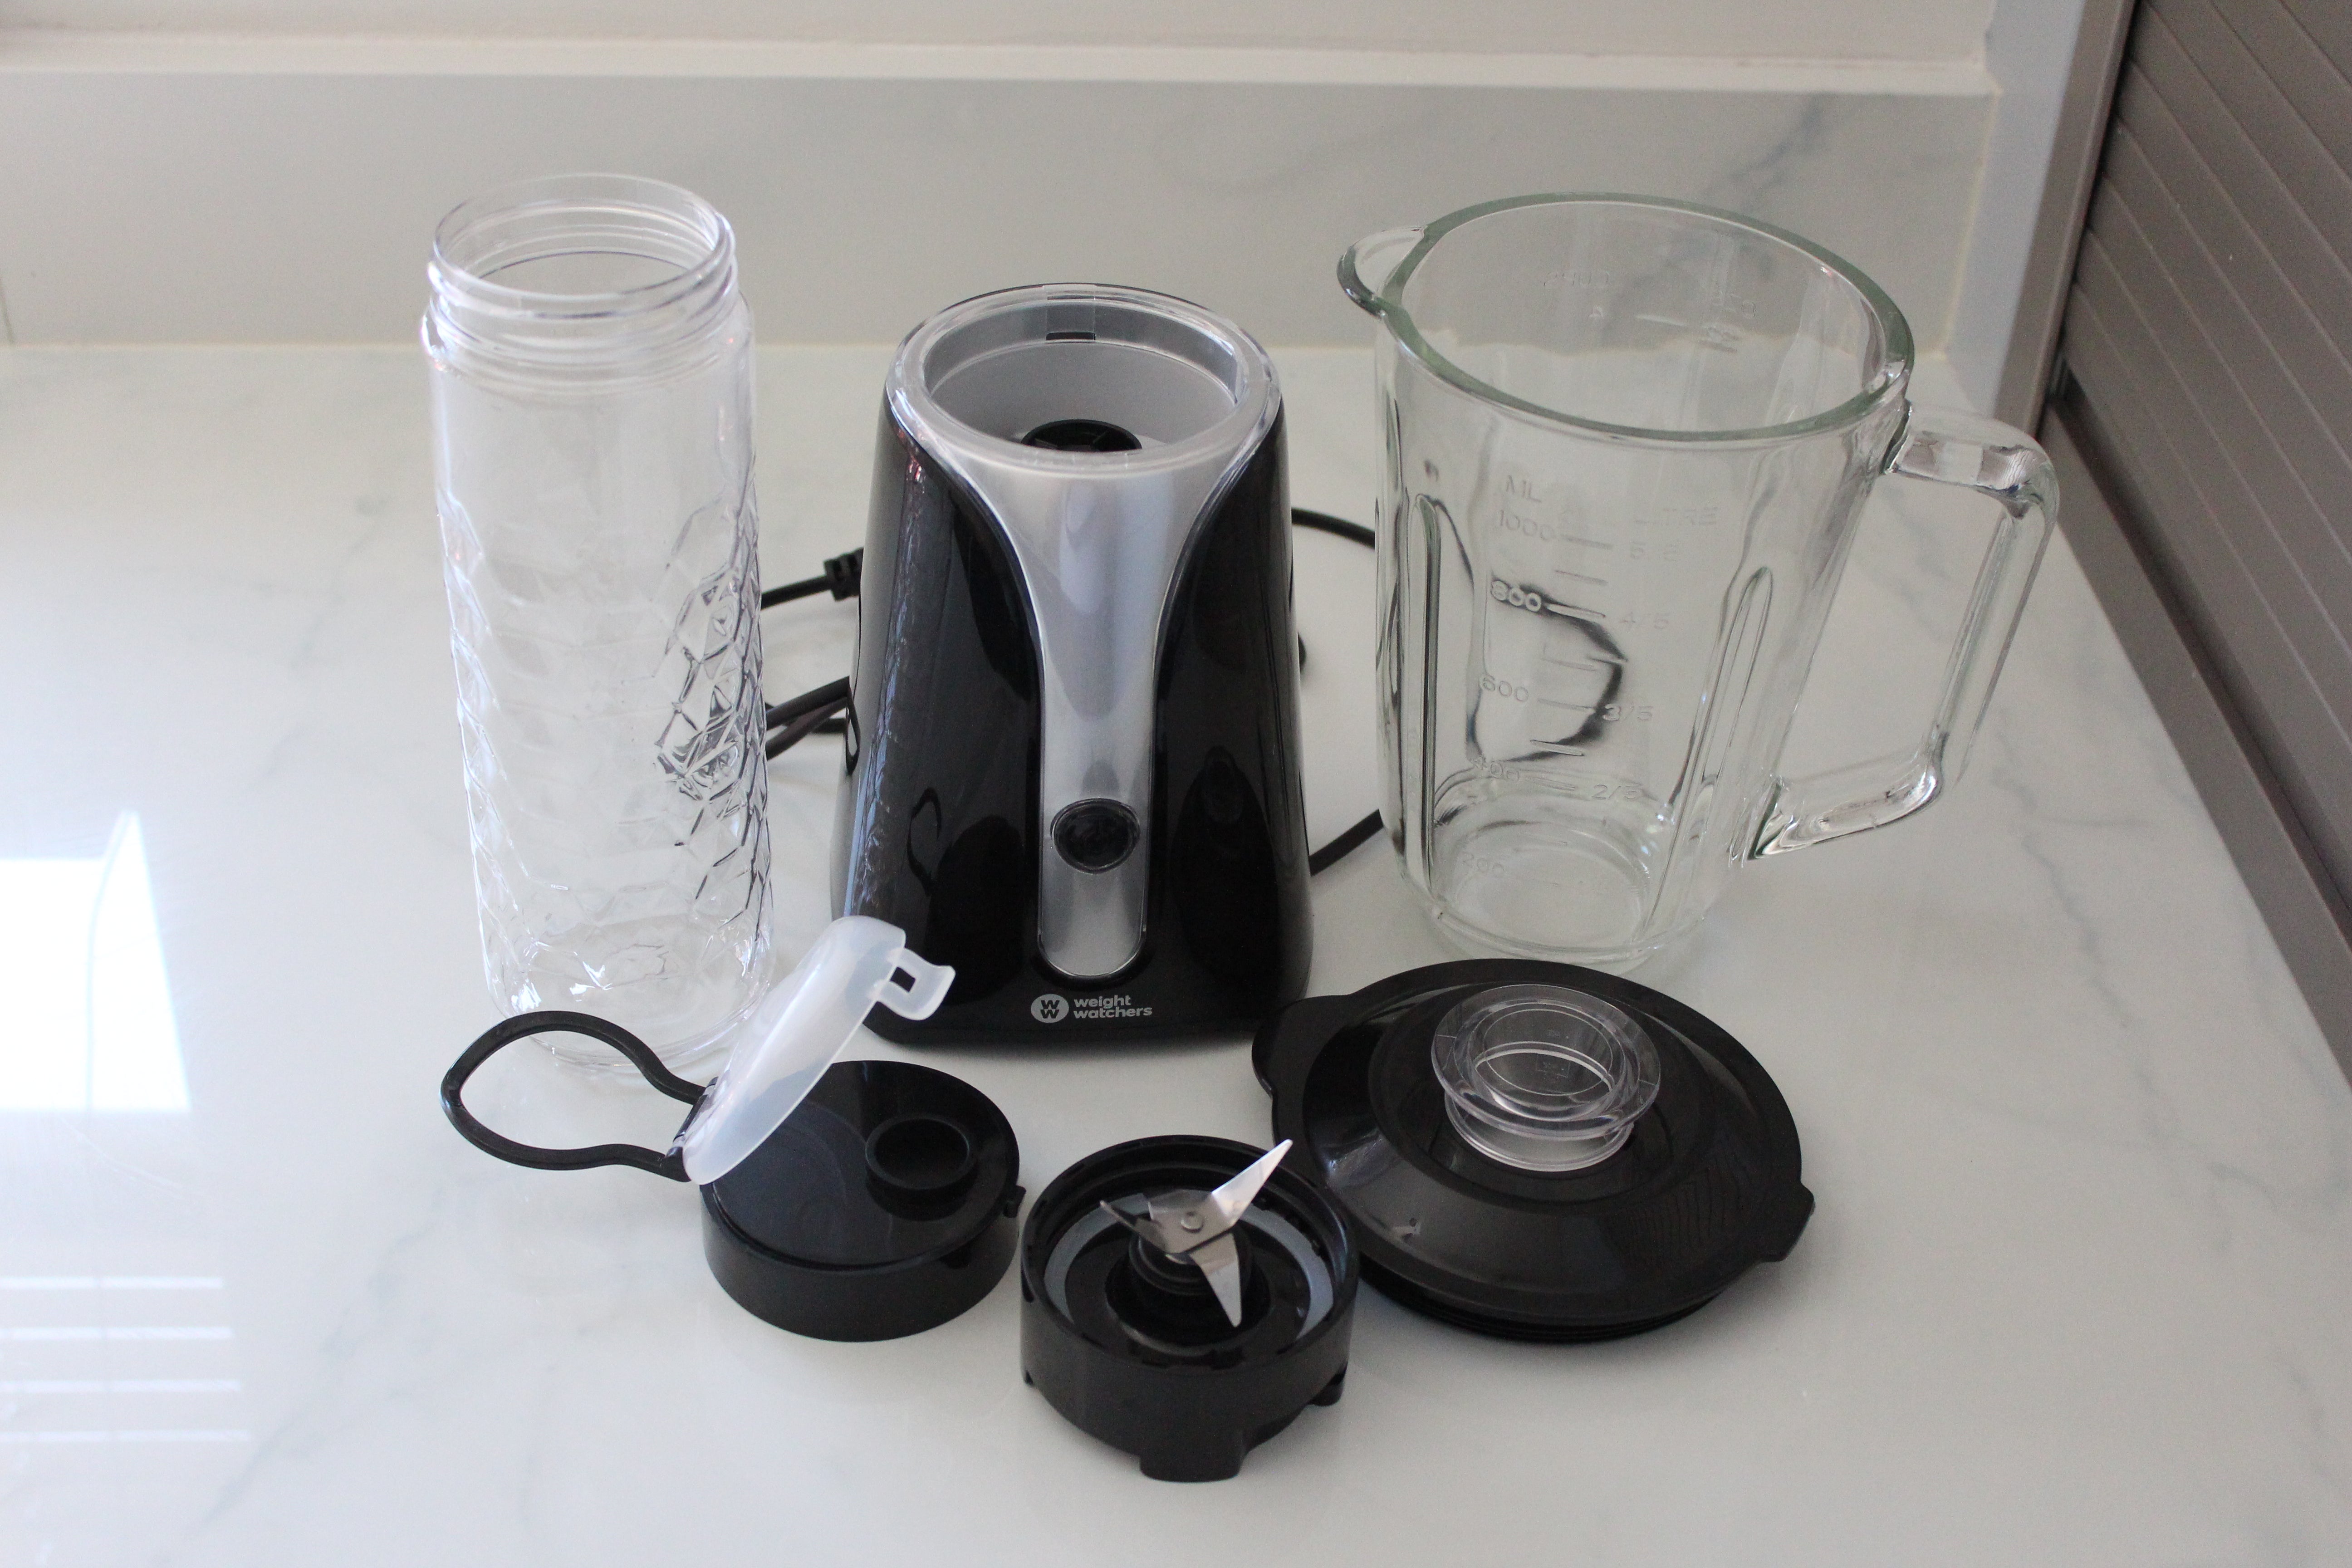 Weight Watchers 2-in-1 blender with to-go bottle and pitcher.